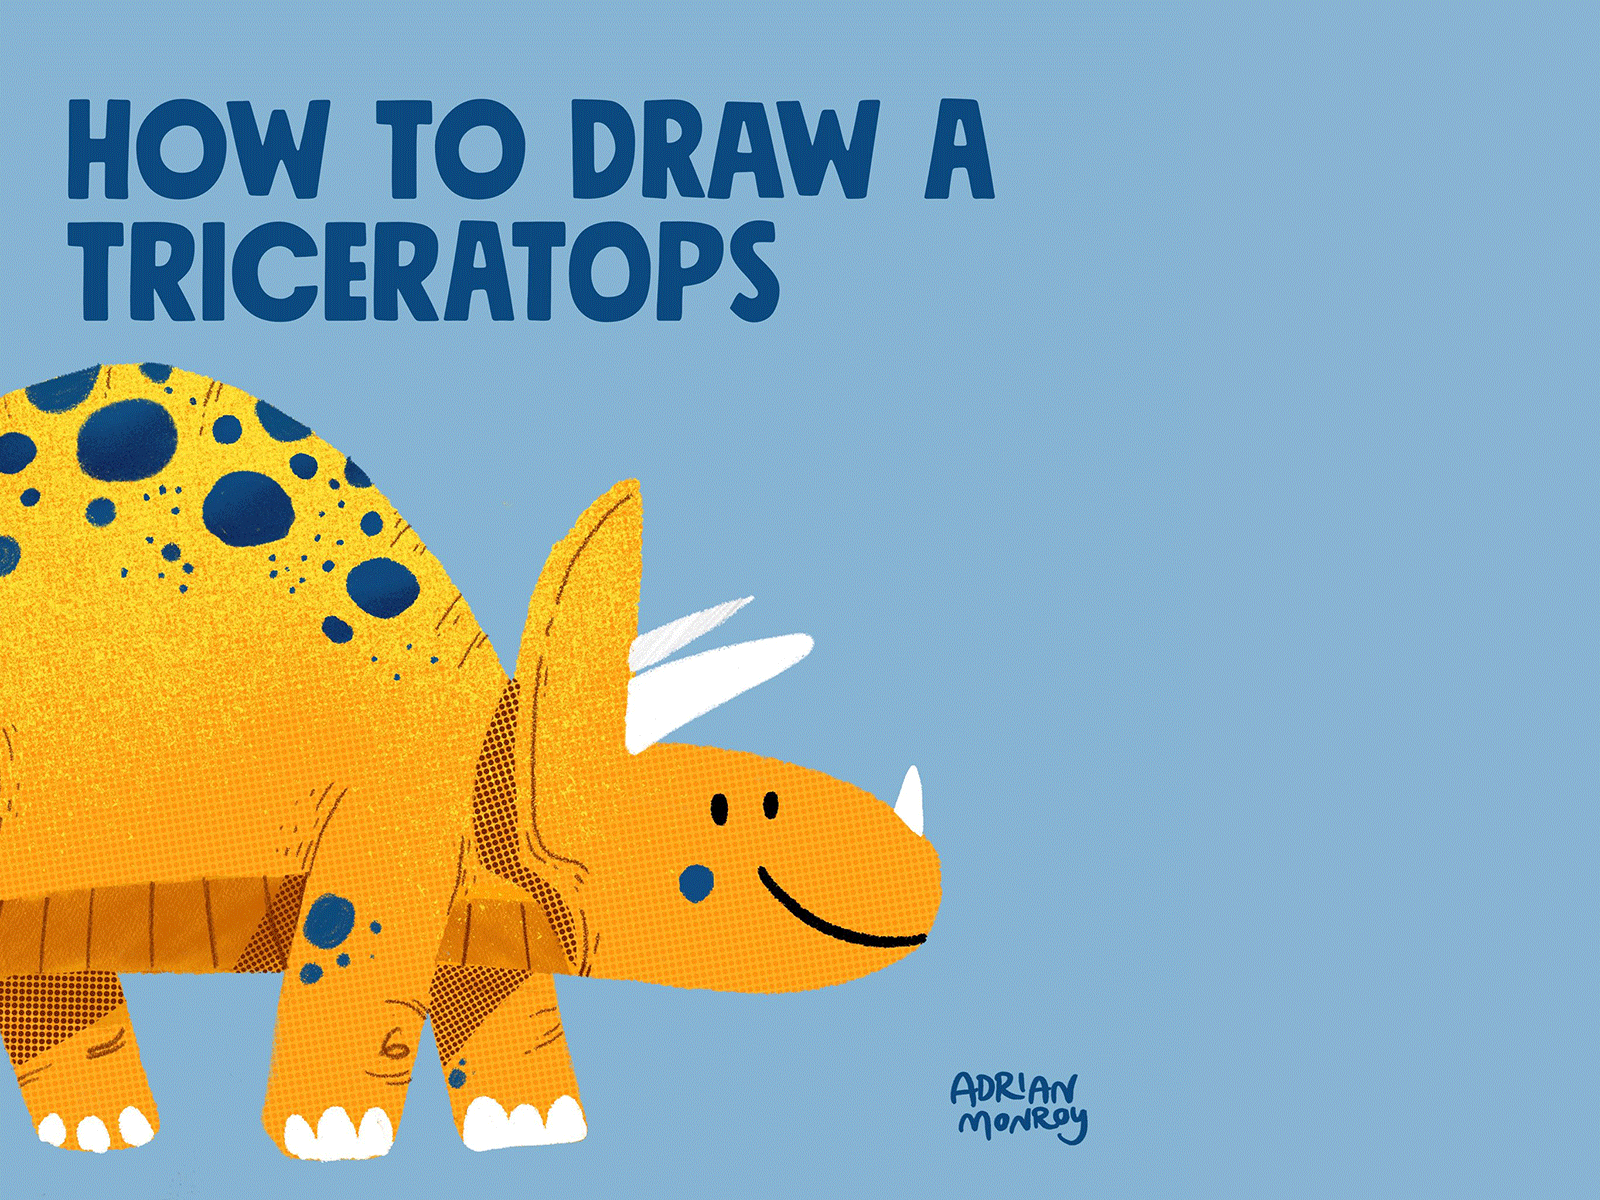 Triceratops cute dinosaurs illustration joy step by step